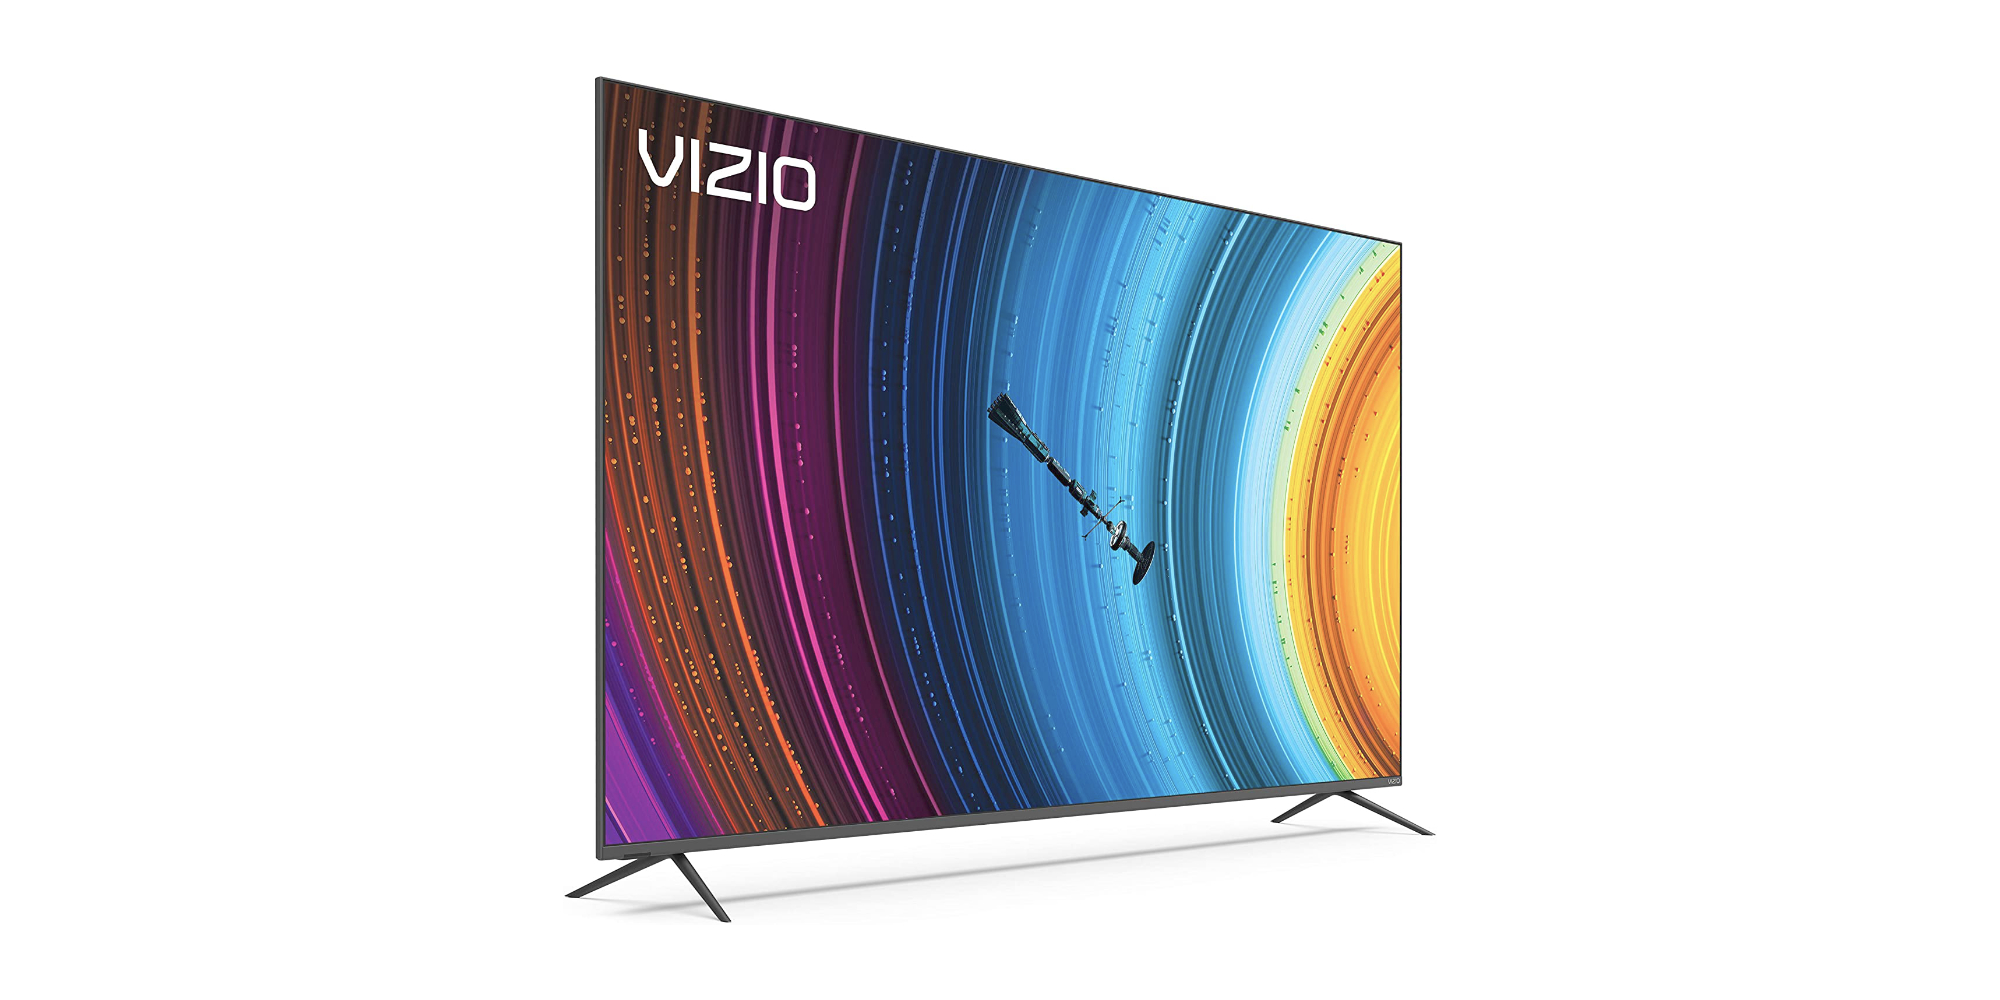 Max out your PS5 with VIZIO's 65inch 4K 120Hz AirPlay 2 Smart TV